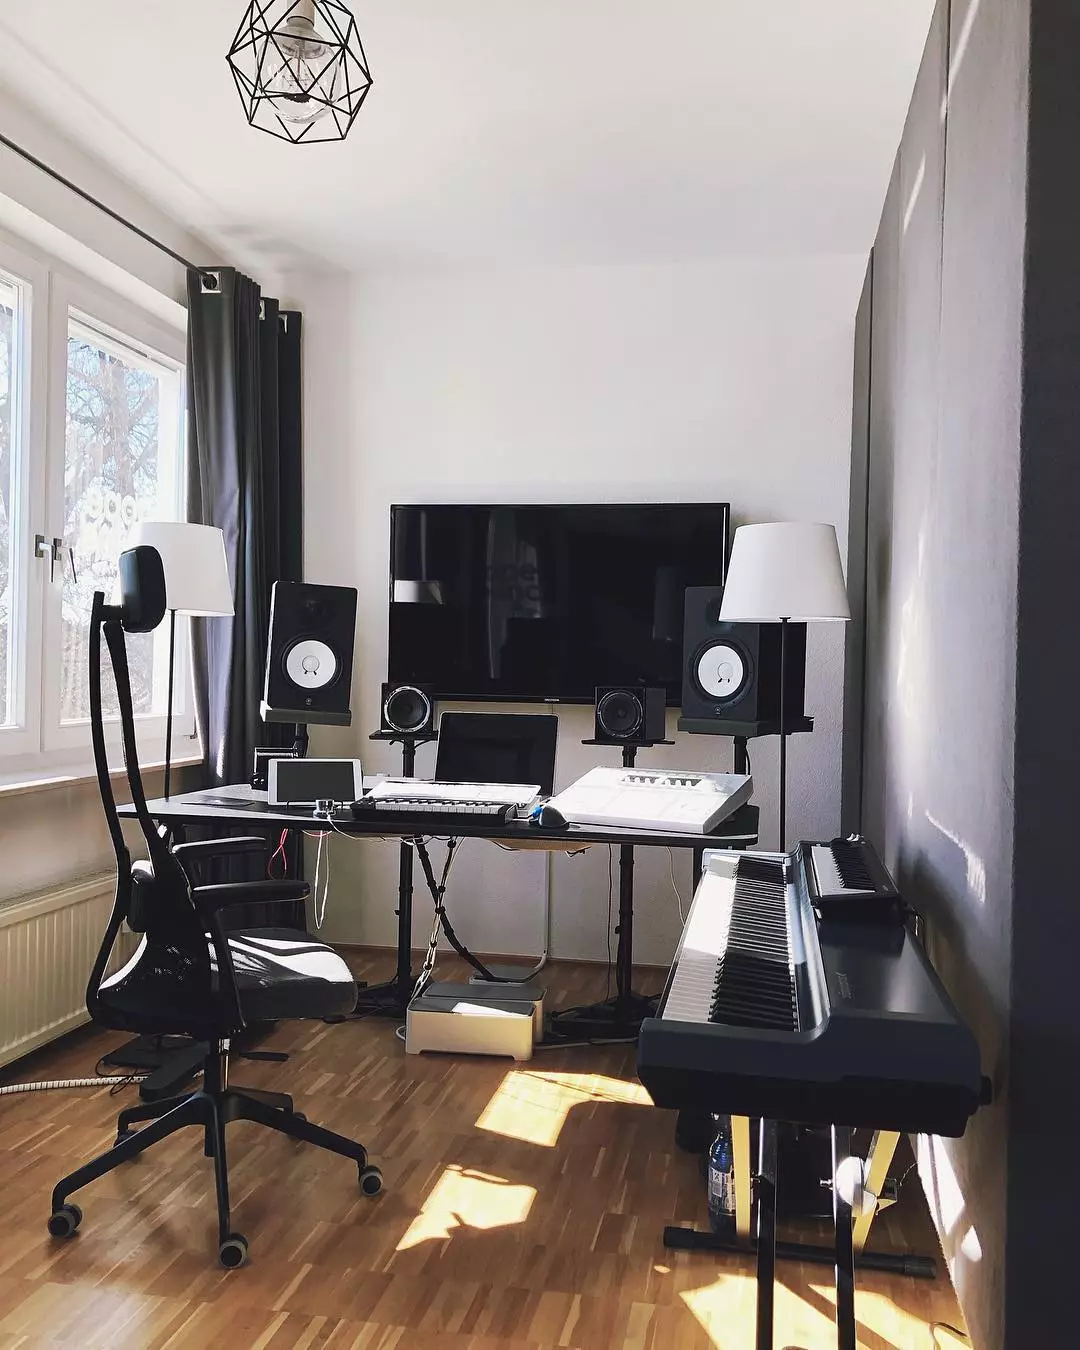 How To Build A Home Recording Studio On A Budget